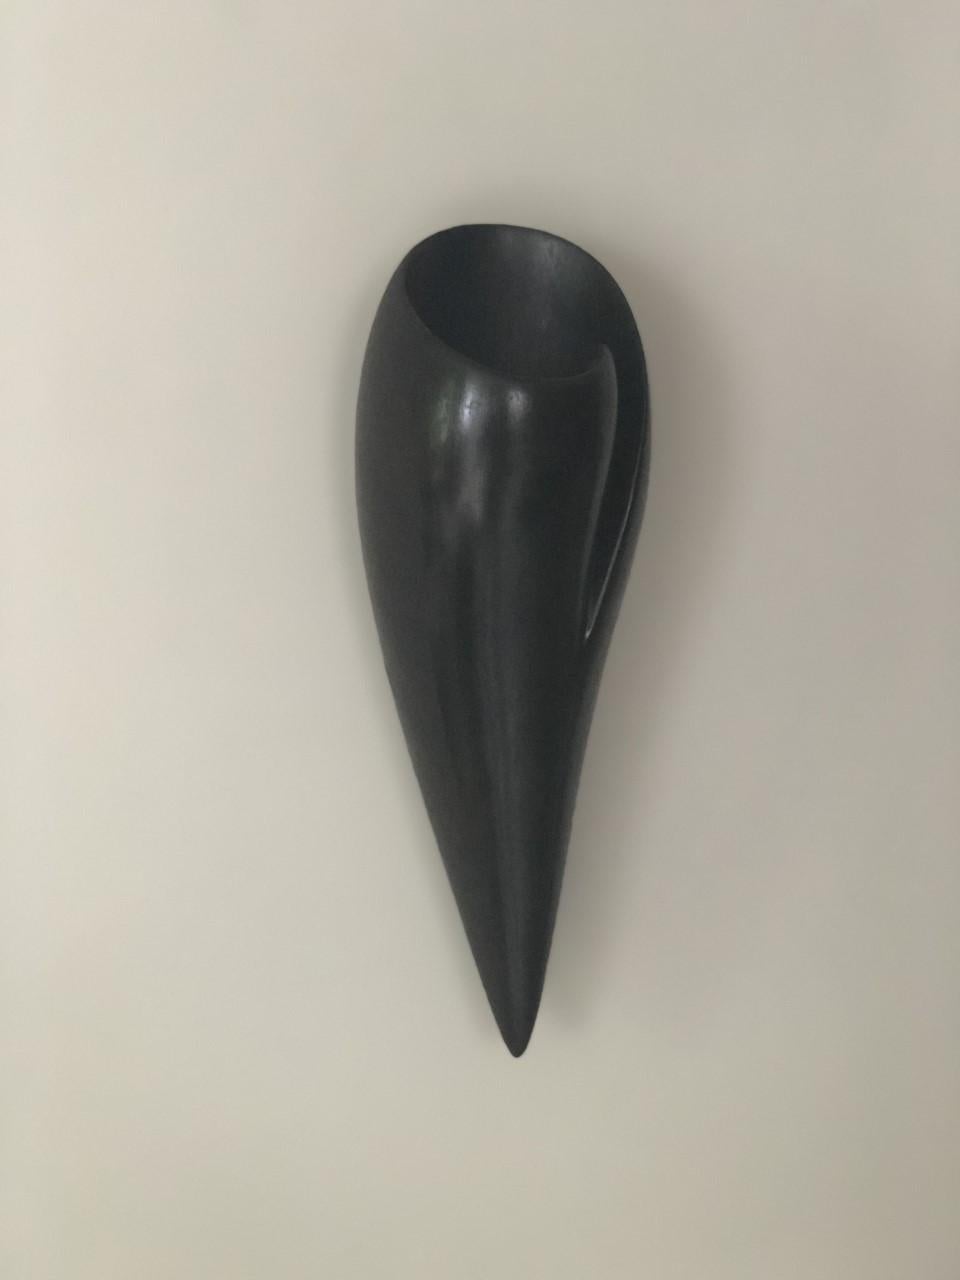 Molded Leila Contemporary Wall Sconce, Wall Light in Ebony Plaster, Hannah Woodhouse